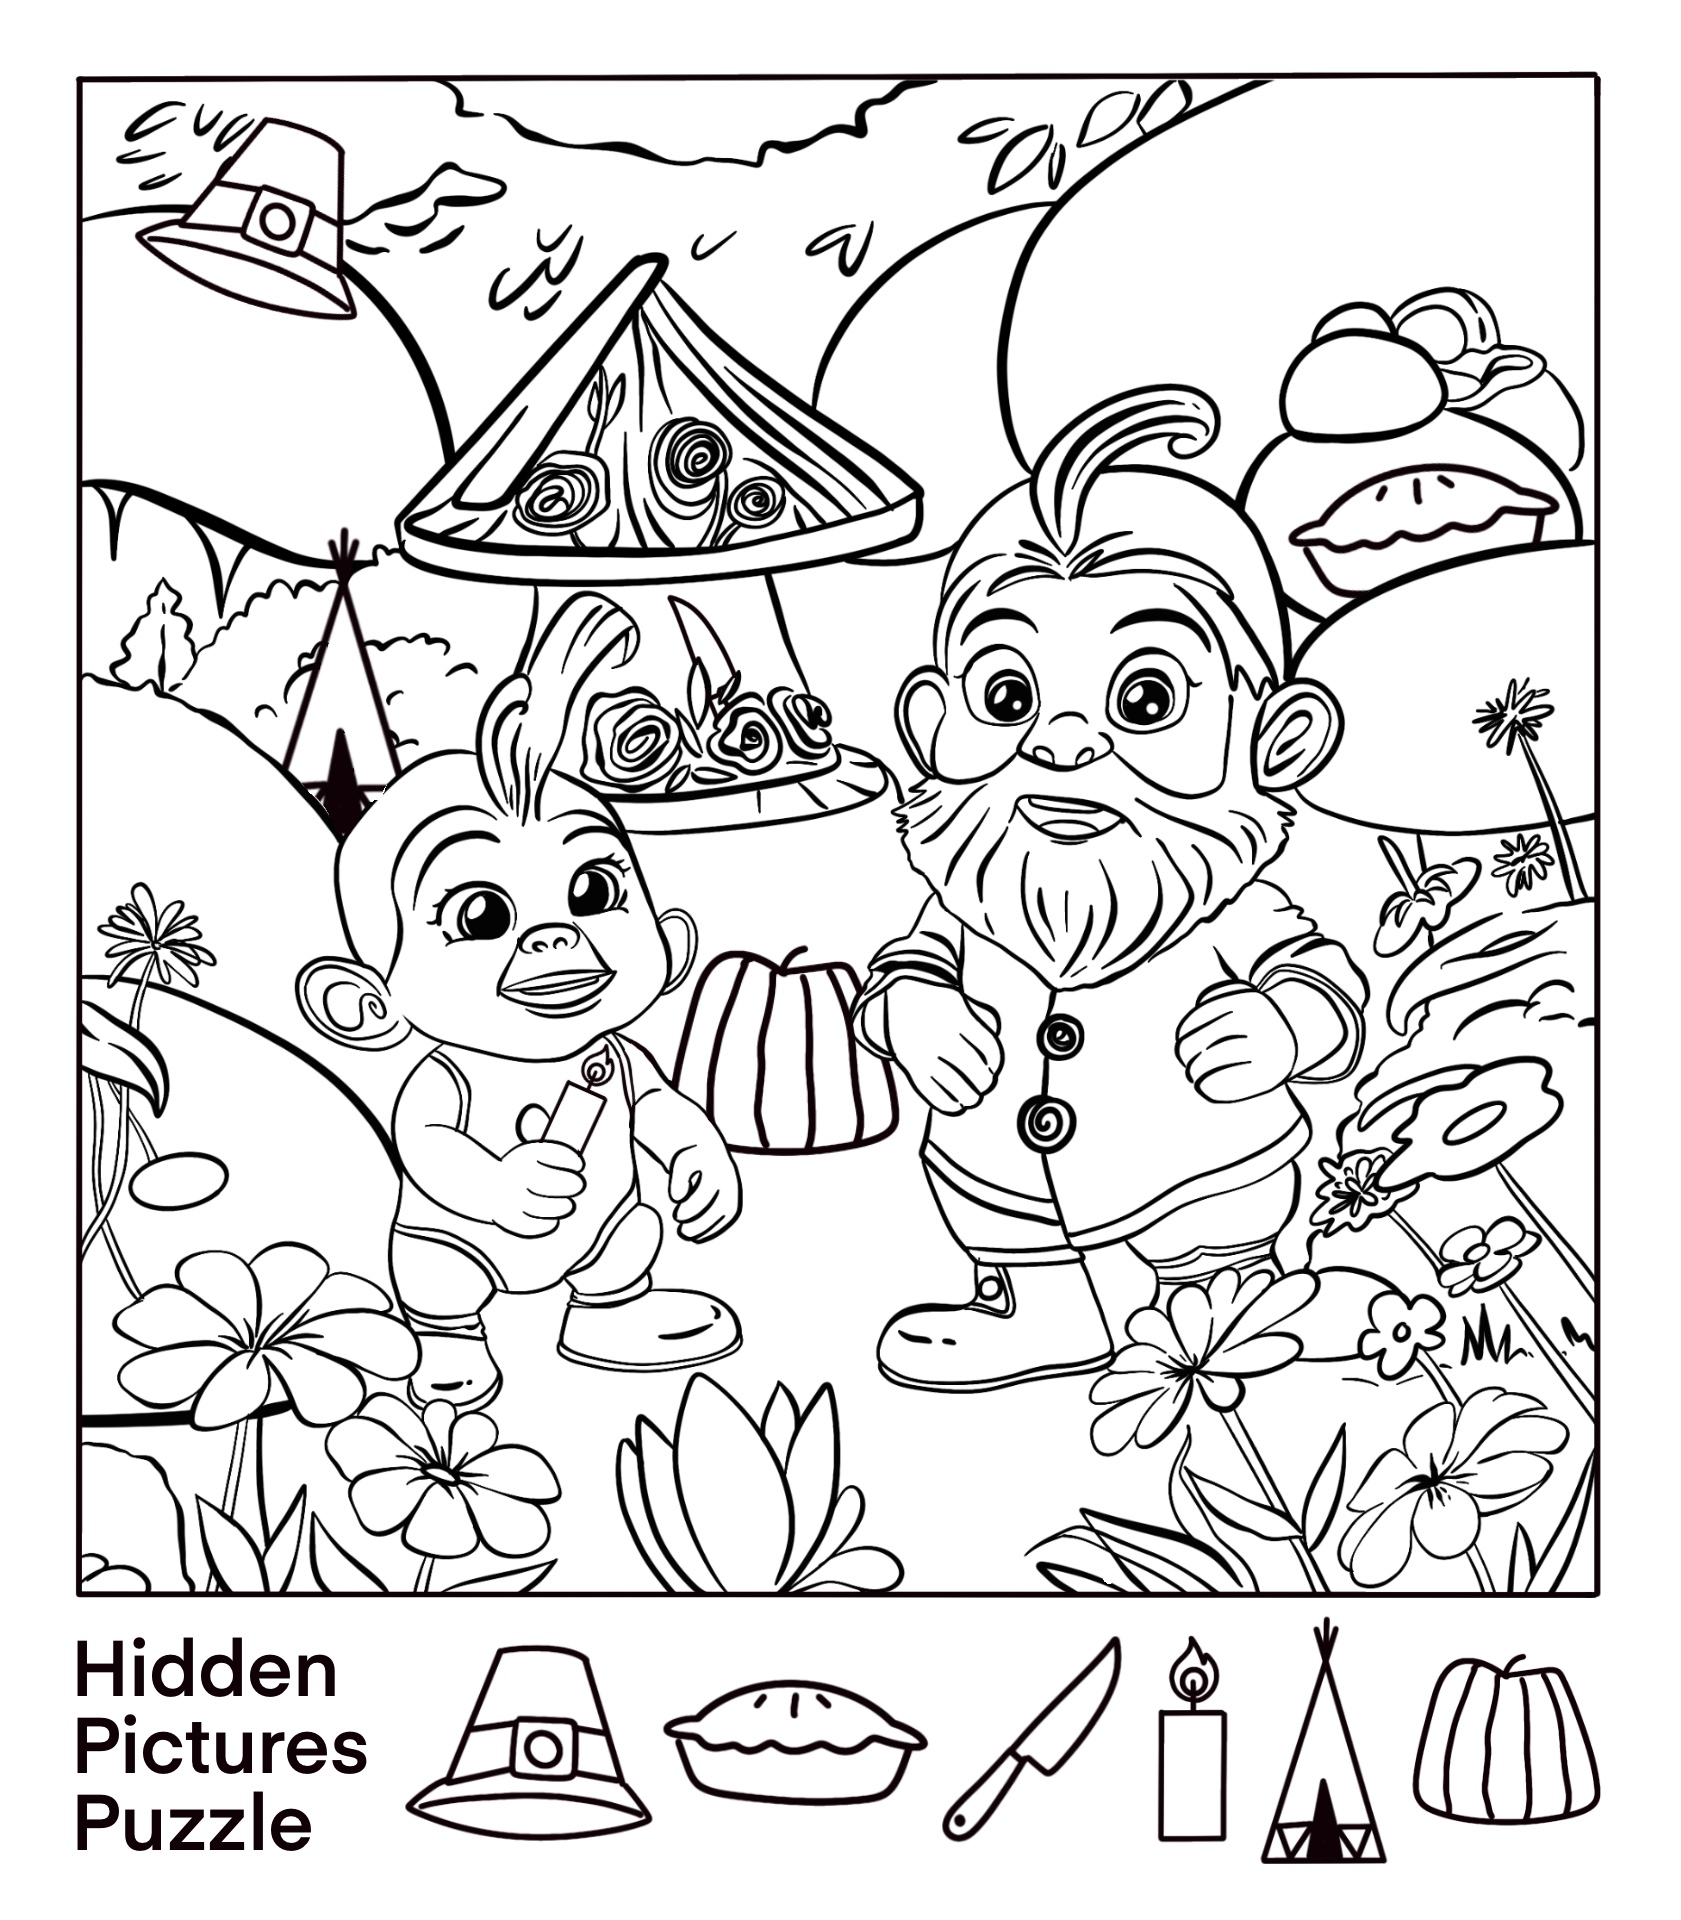 printable-highlights-hidden-pictures-printable-world-holiday